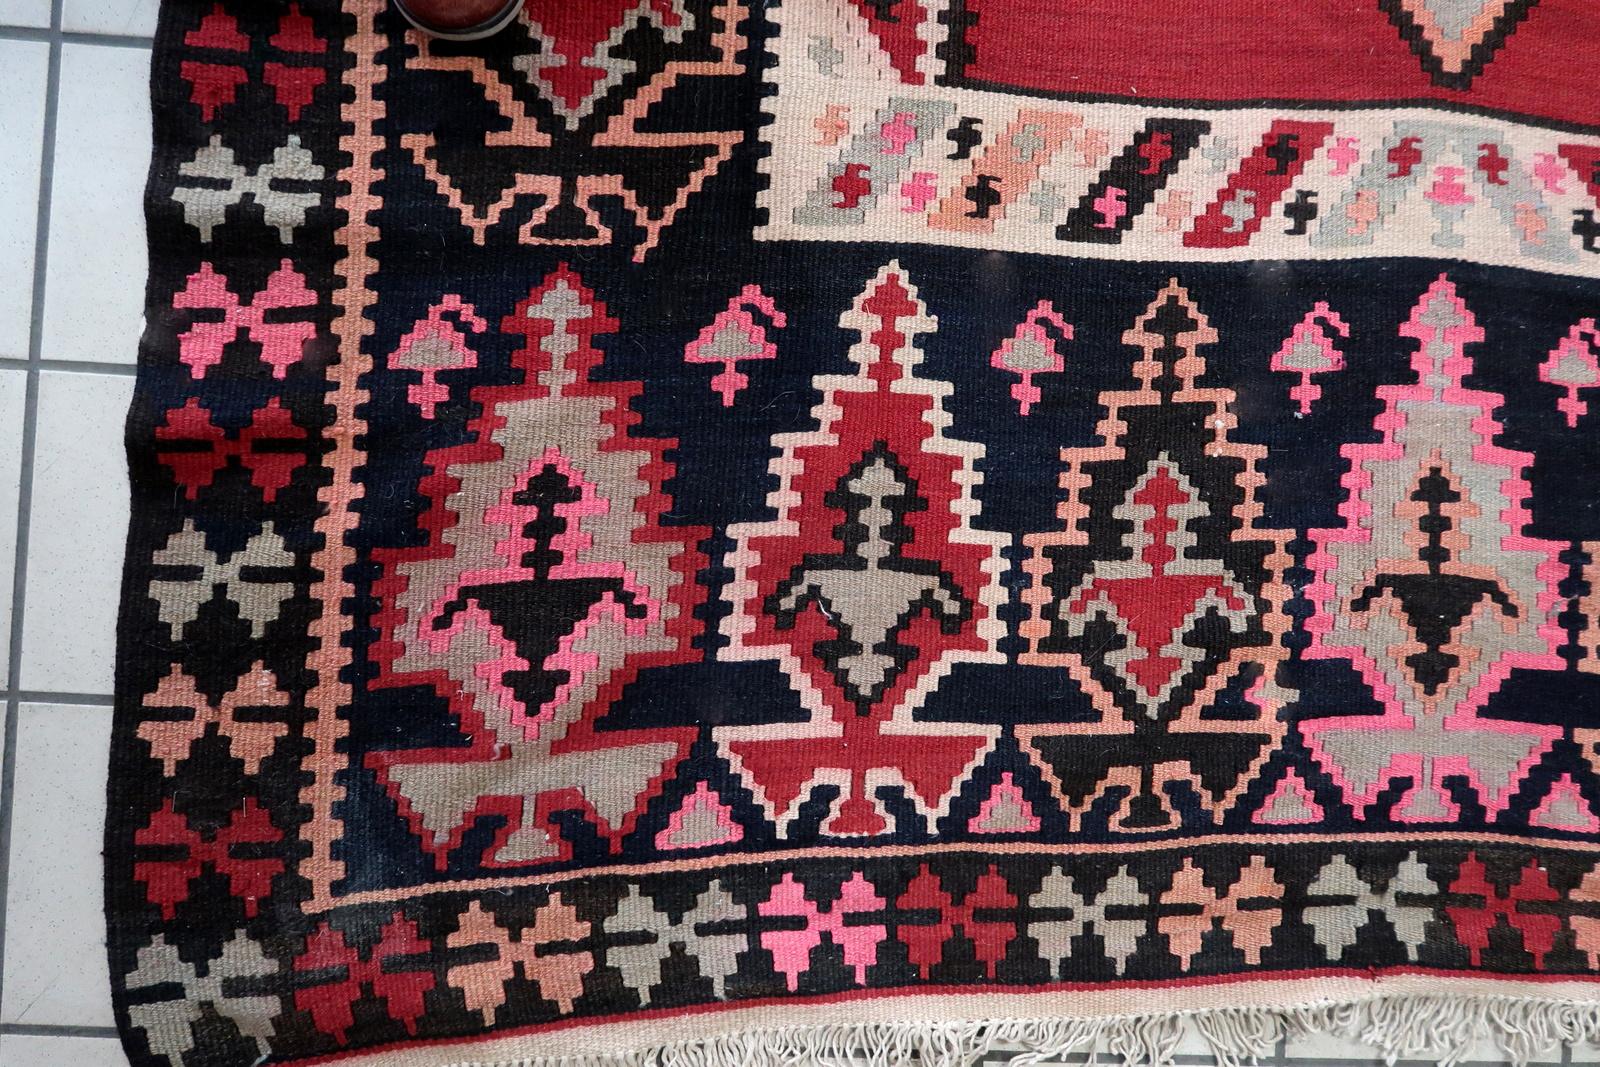 Add a splash of color and culture to your space with this Handmade Vintage Afghan Herati Kilim. Created in the 1960s, this extraordinary kilim measures 5.2' x 12.1' (160cm x 371cm) and is in good condition with some charming signs of age. Crafted